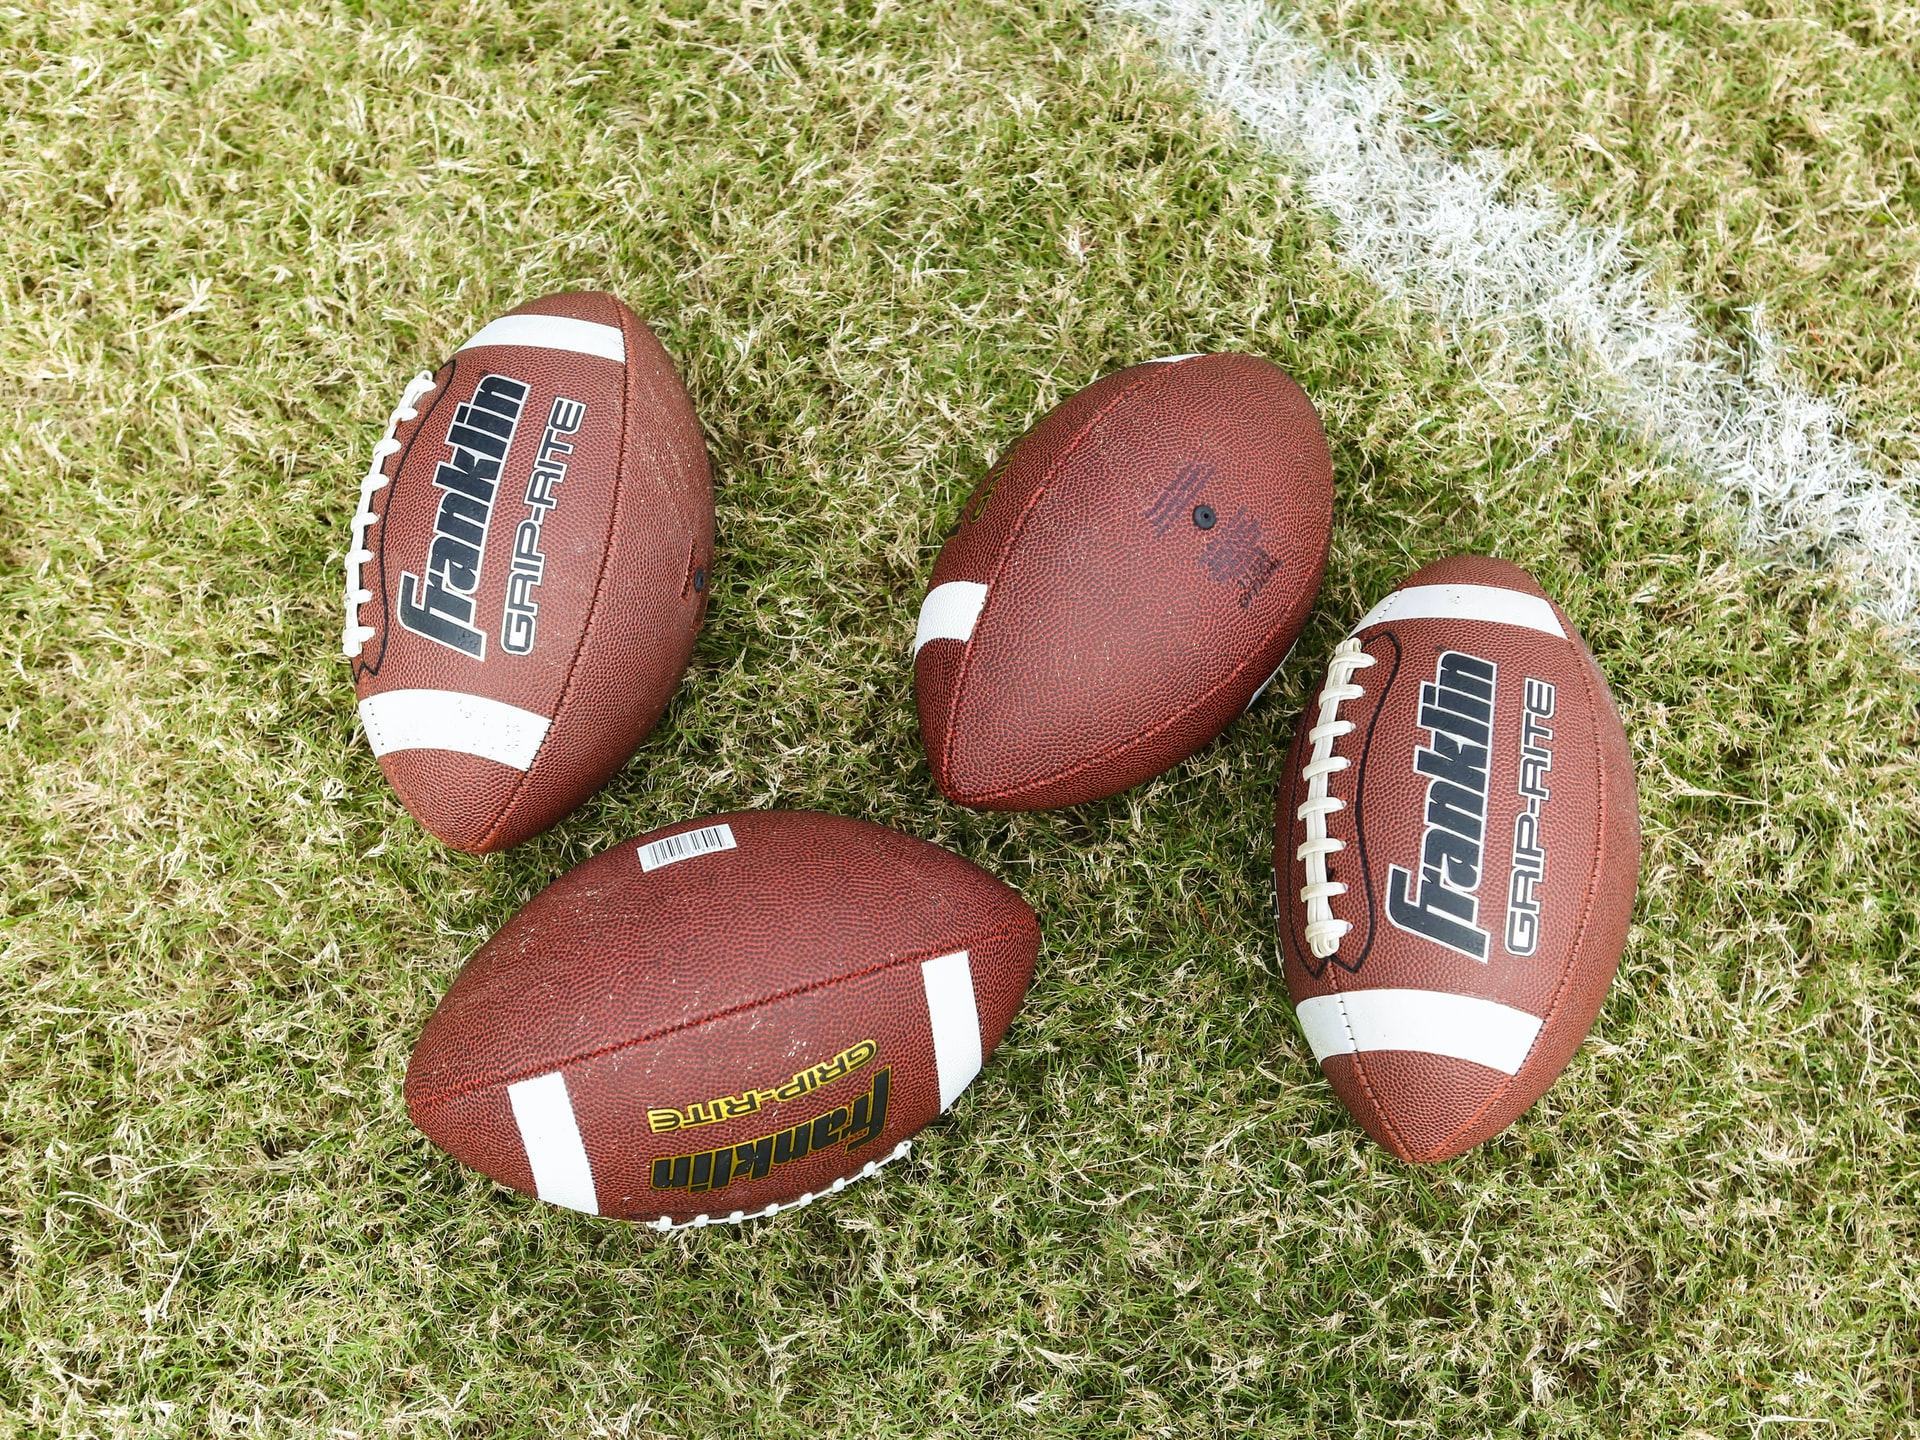 Some fun facts about American football and football games